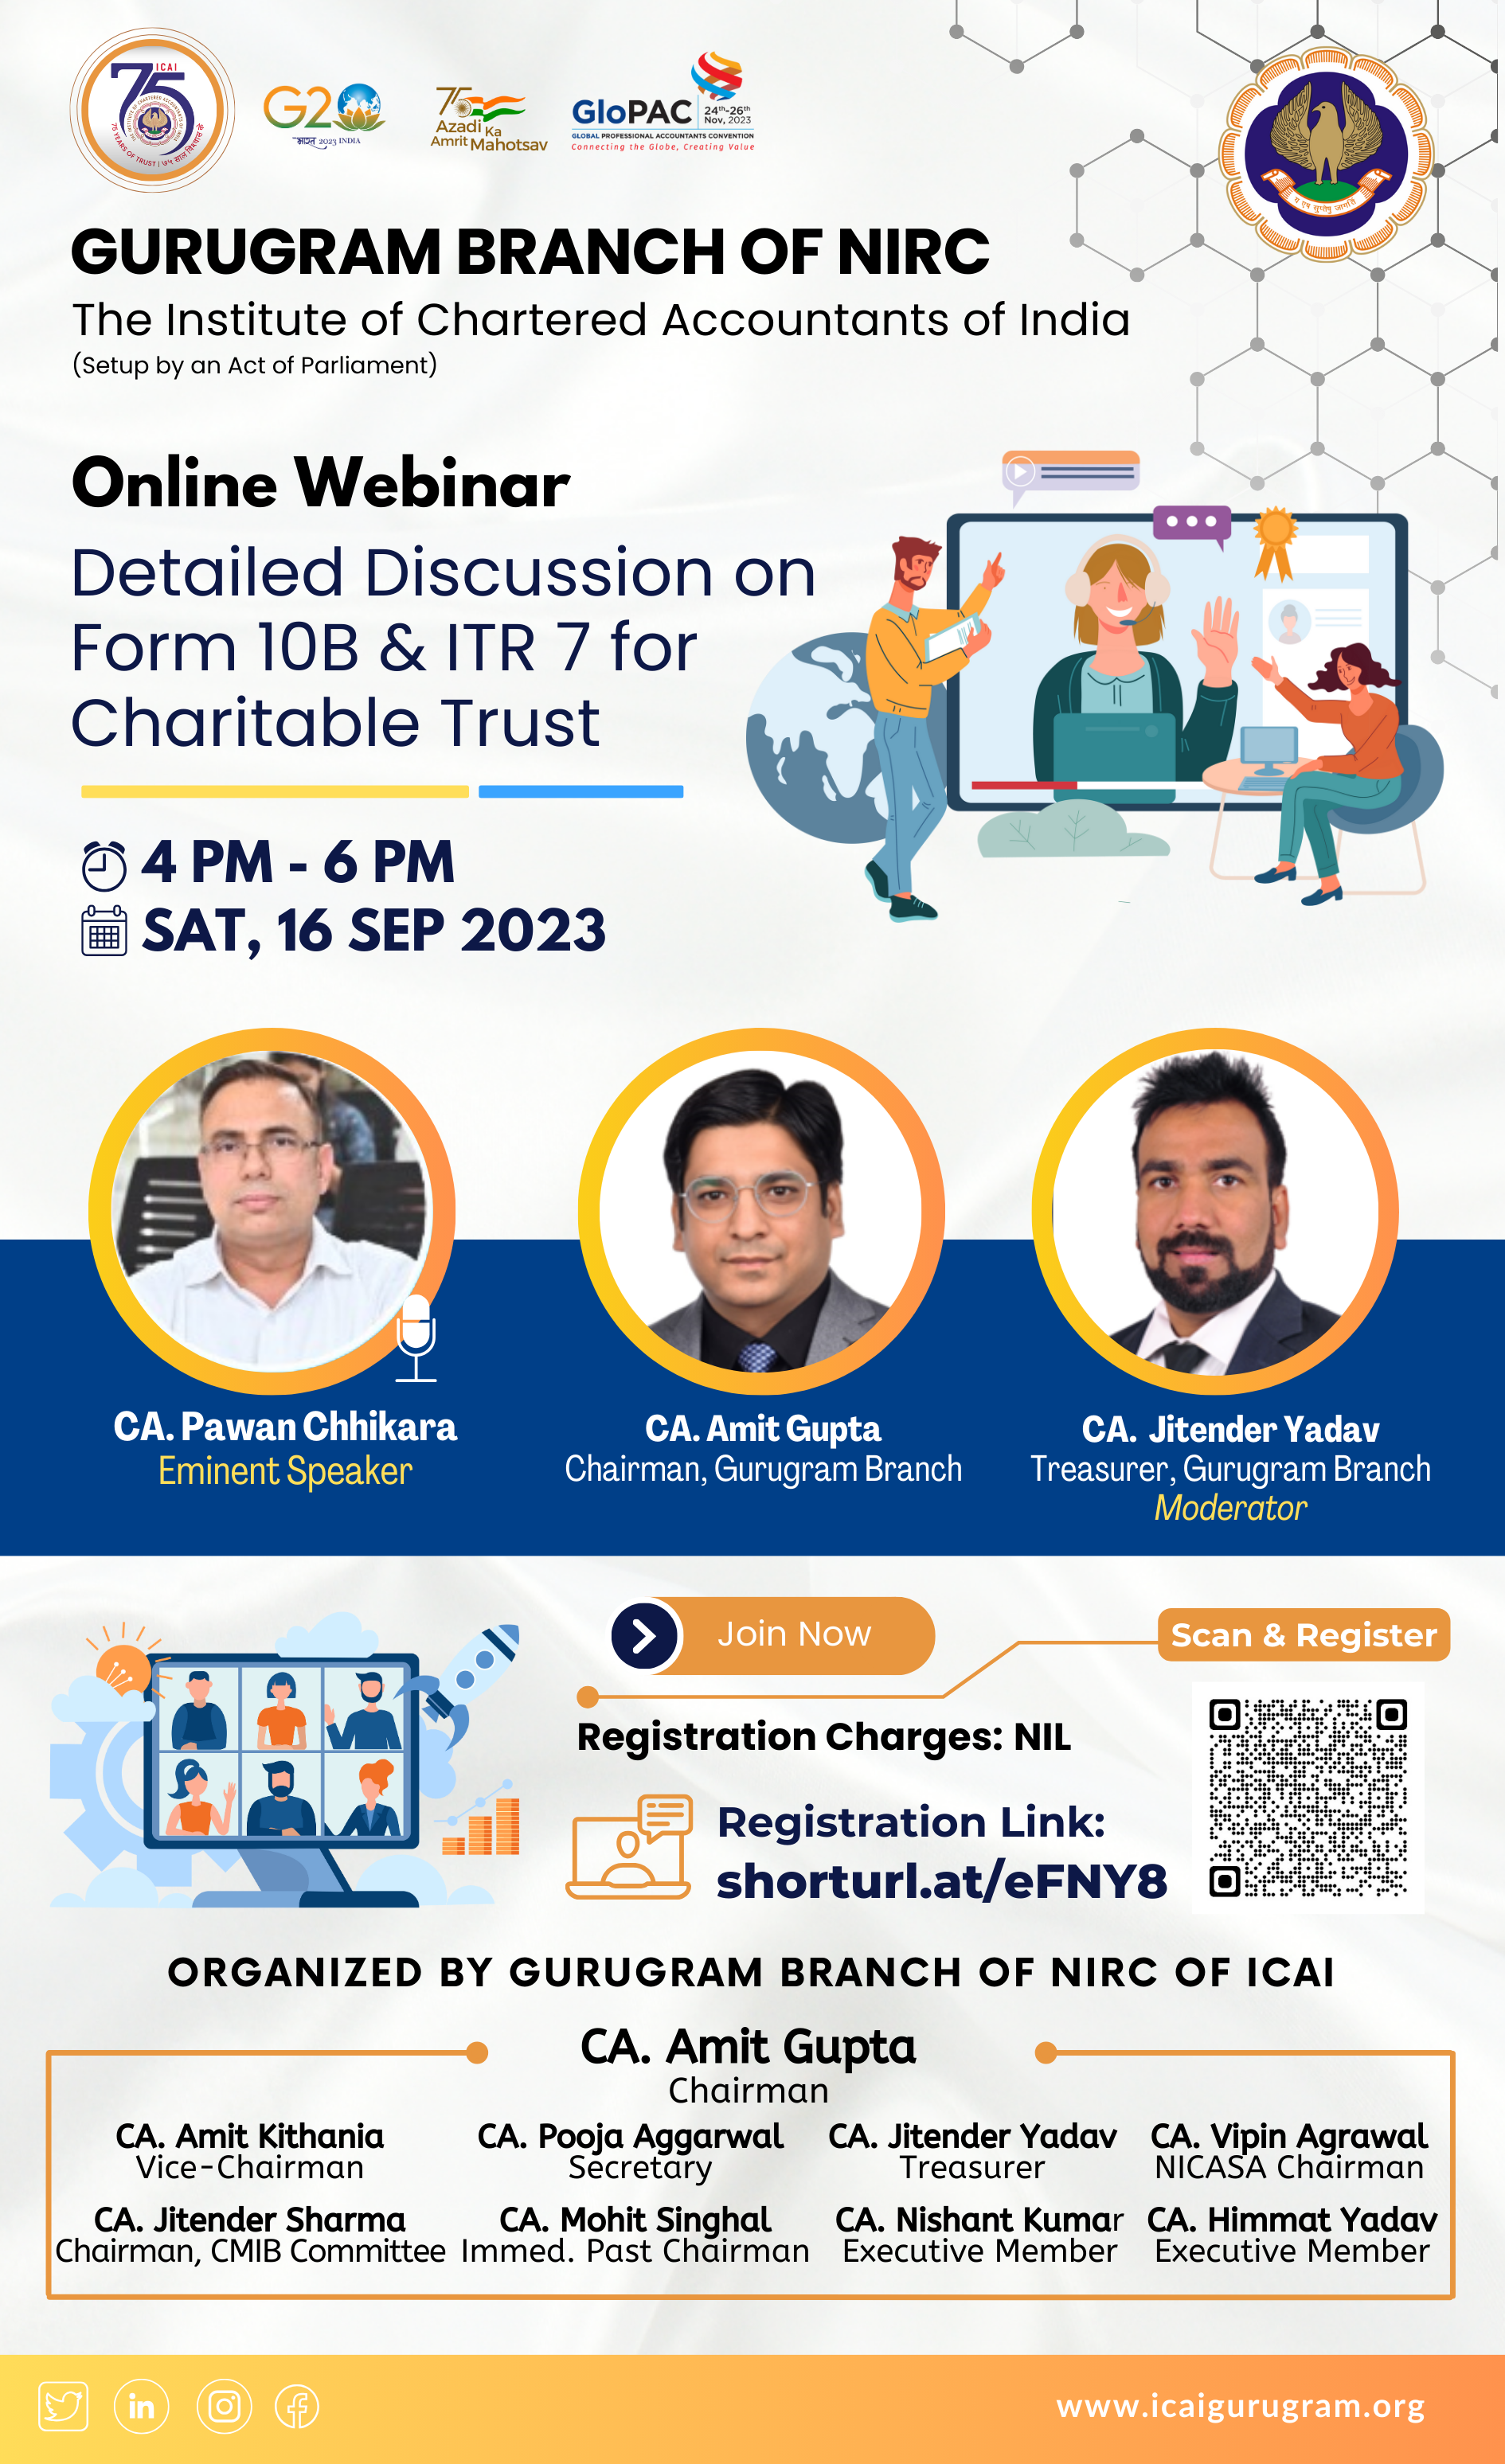 Webinar on Detailed Discussion on Form 10B & ITR 7 for Charitable Trust